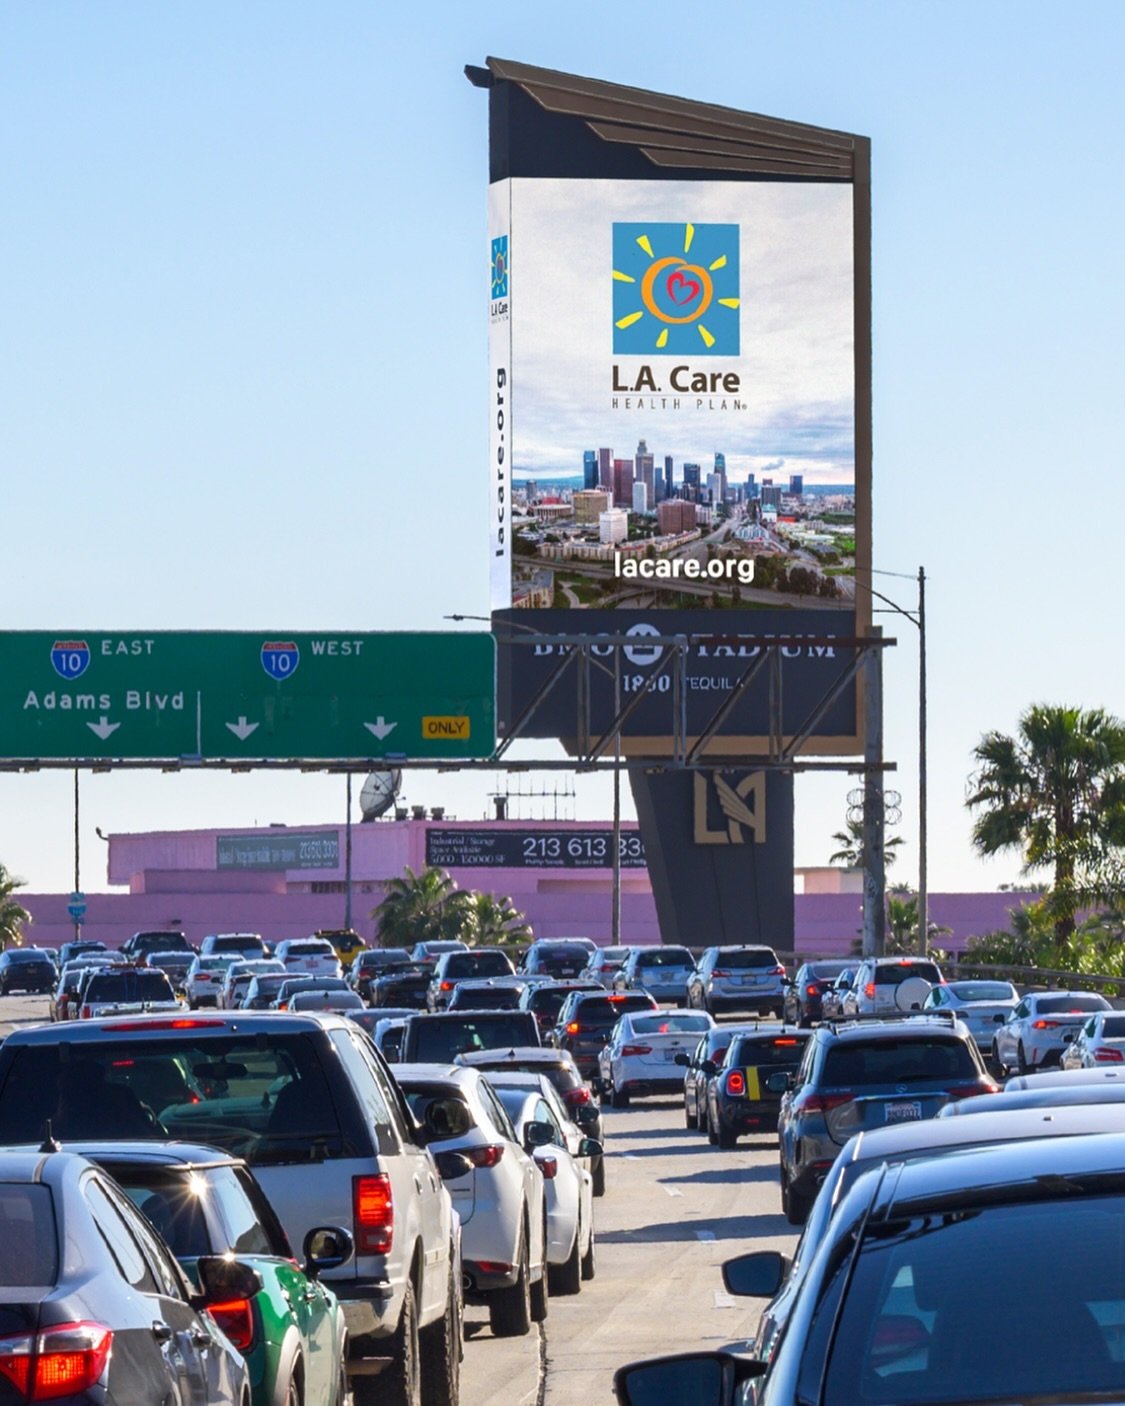 LA Care connects with Angelenos on The Towers on the 110 freeway, the main transit to downtown, LAX, and the city&rsquo;s major sports &amp; entertainment venues. 💛

#iconicmedia #ooh #lacare #dooh #healthcare #nurseappreciationweek @lacarehealth